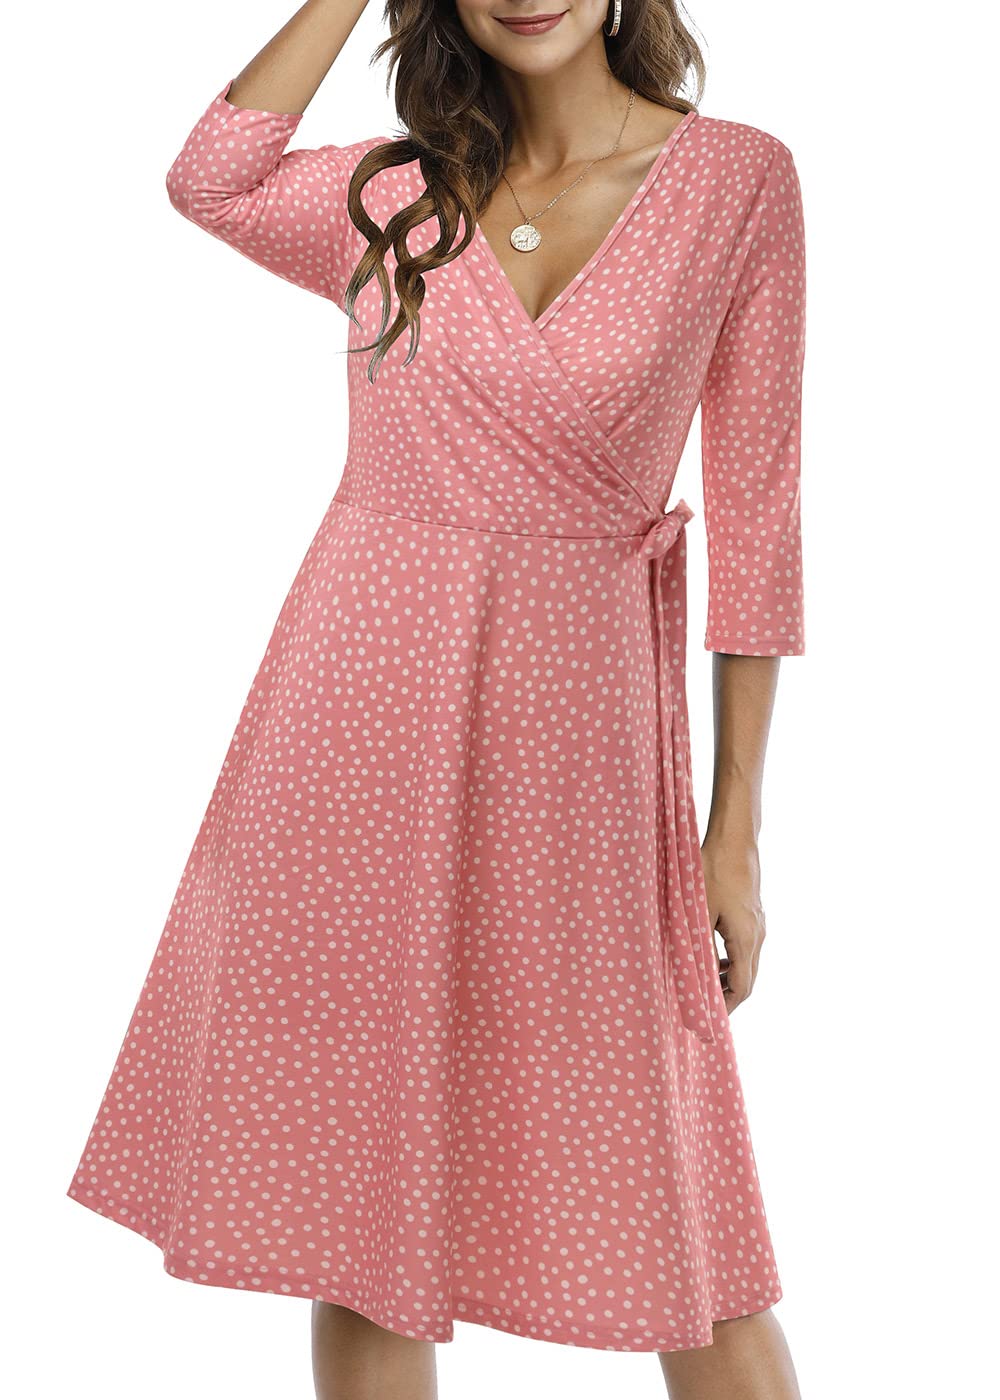 CHARMYI Wrap Dress for Women Casual V Neck Floral Party Swing A-Line Faux Wrap Dresses Midi Plain Tunic Printed Cute Simple Ruched Knee Length 3/4 Sleeve Fall Work Wedding Guest Pink F26 XL